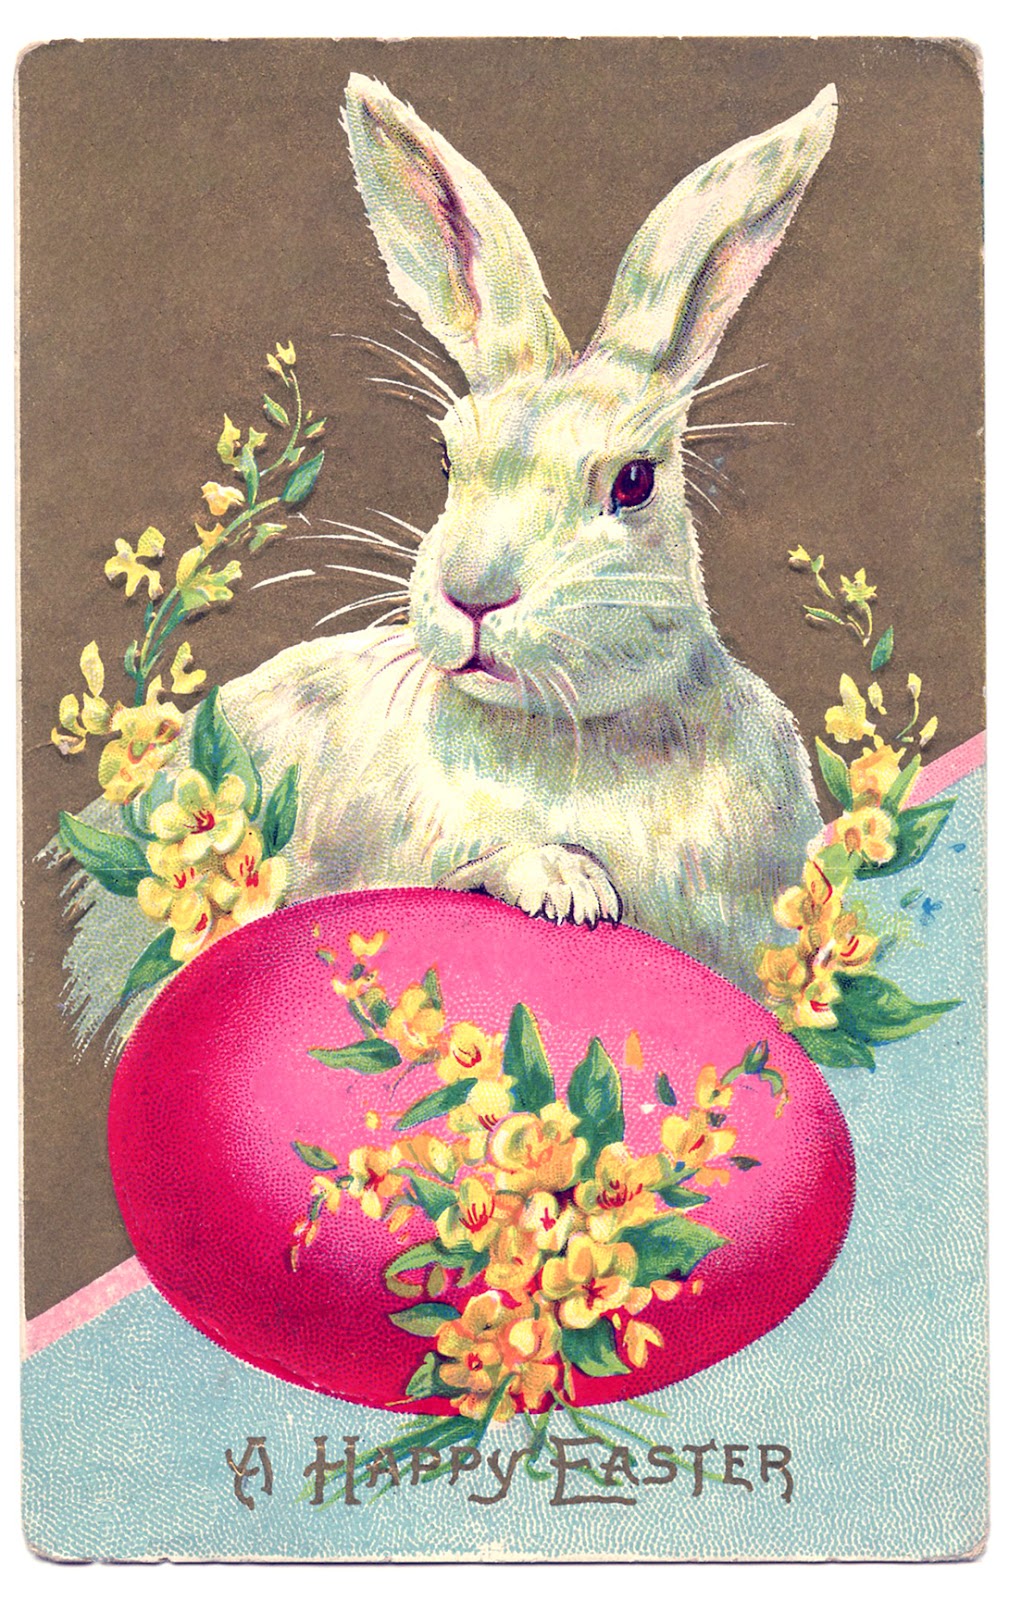 Vintage Easter Clip Art   Big Bunny With Egg   The Graphics Fairy